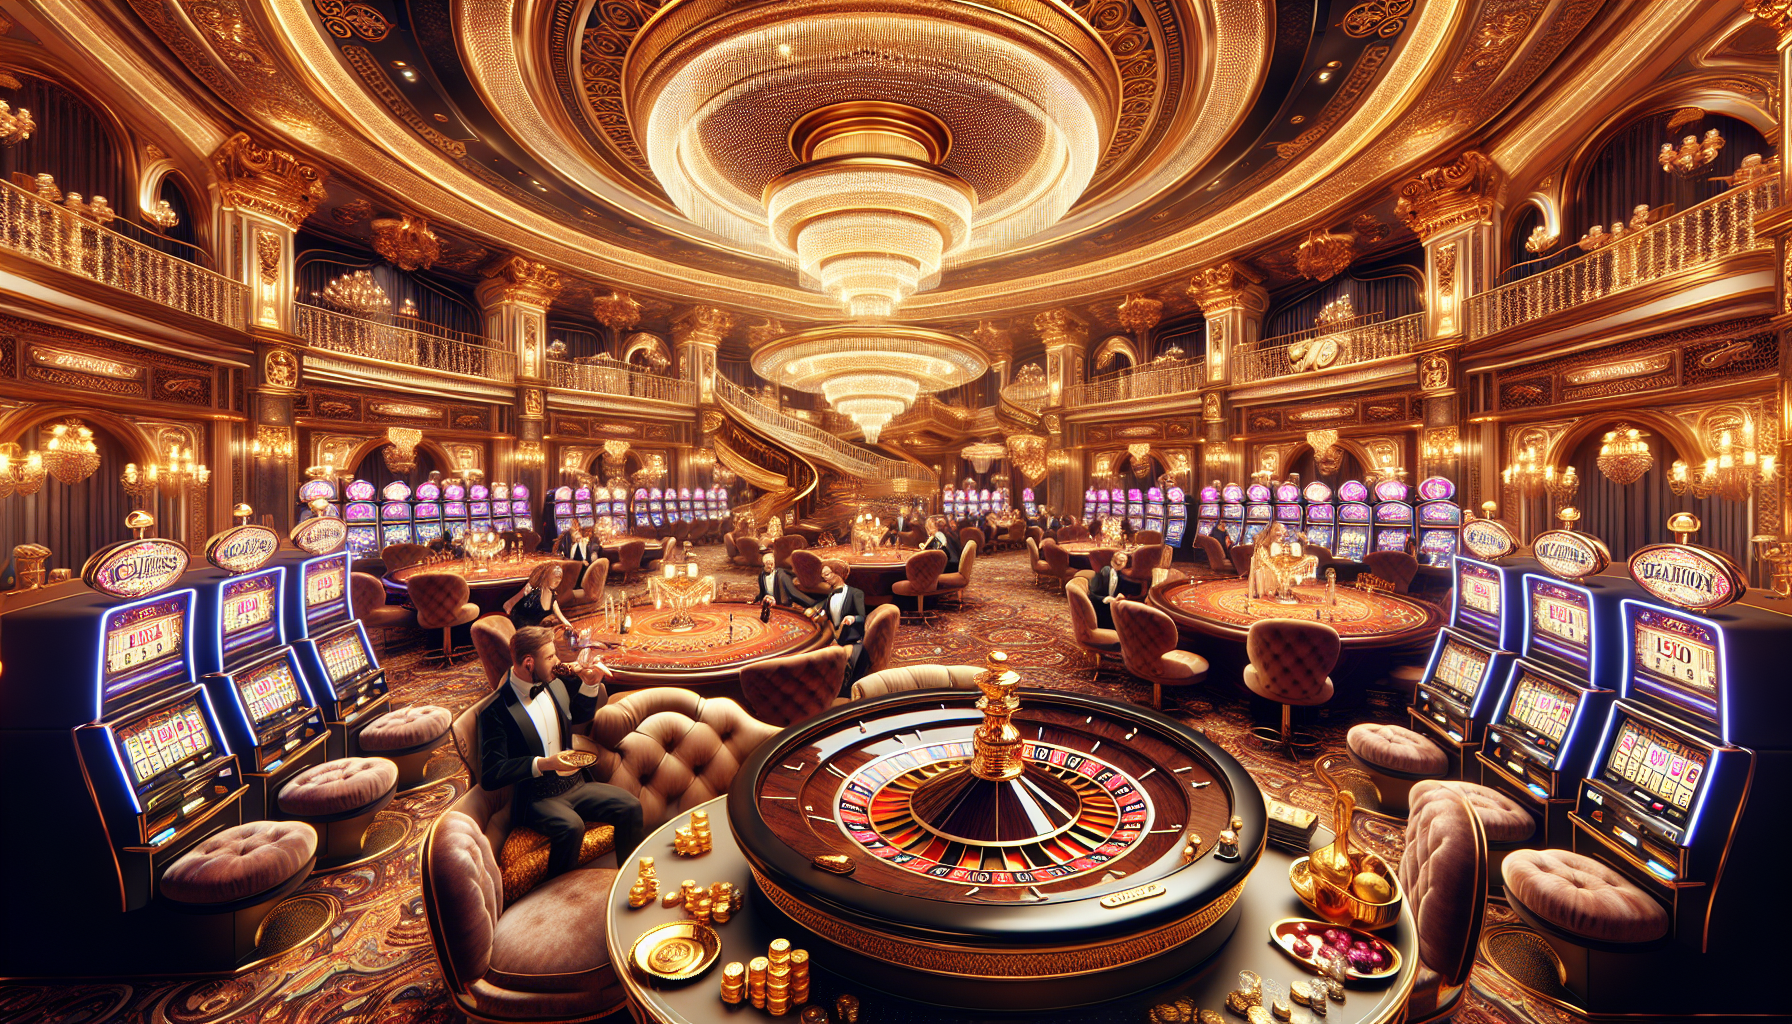 Illustration of a VIP casino with exclusive bonuses and rewards